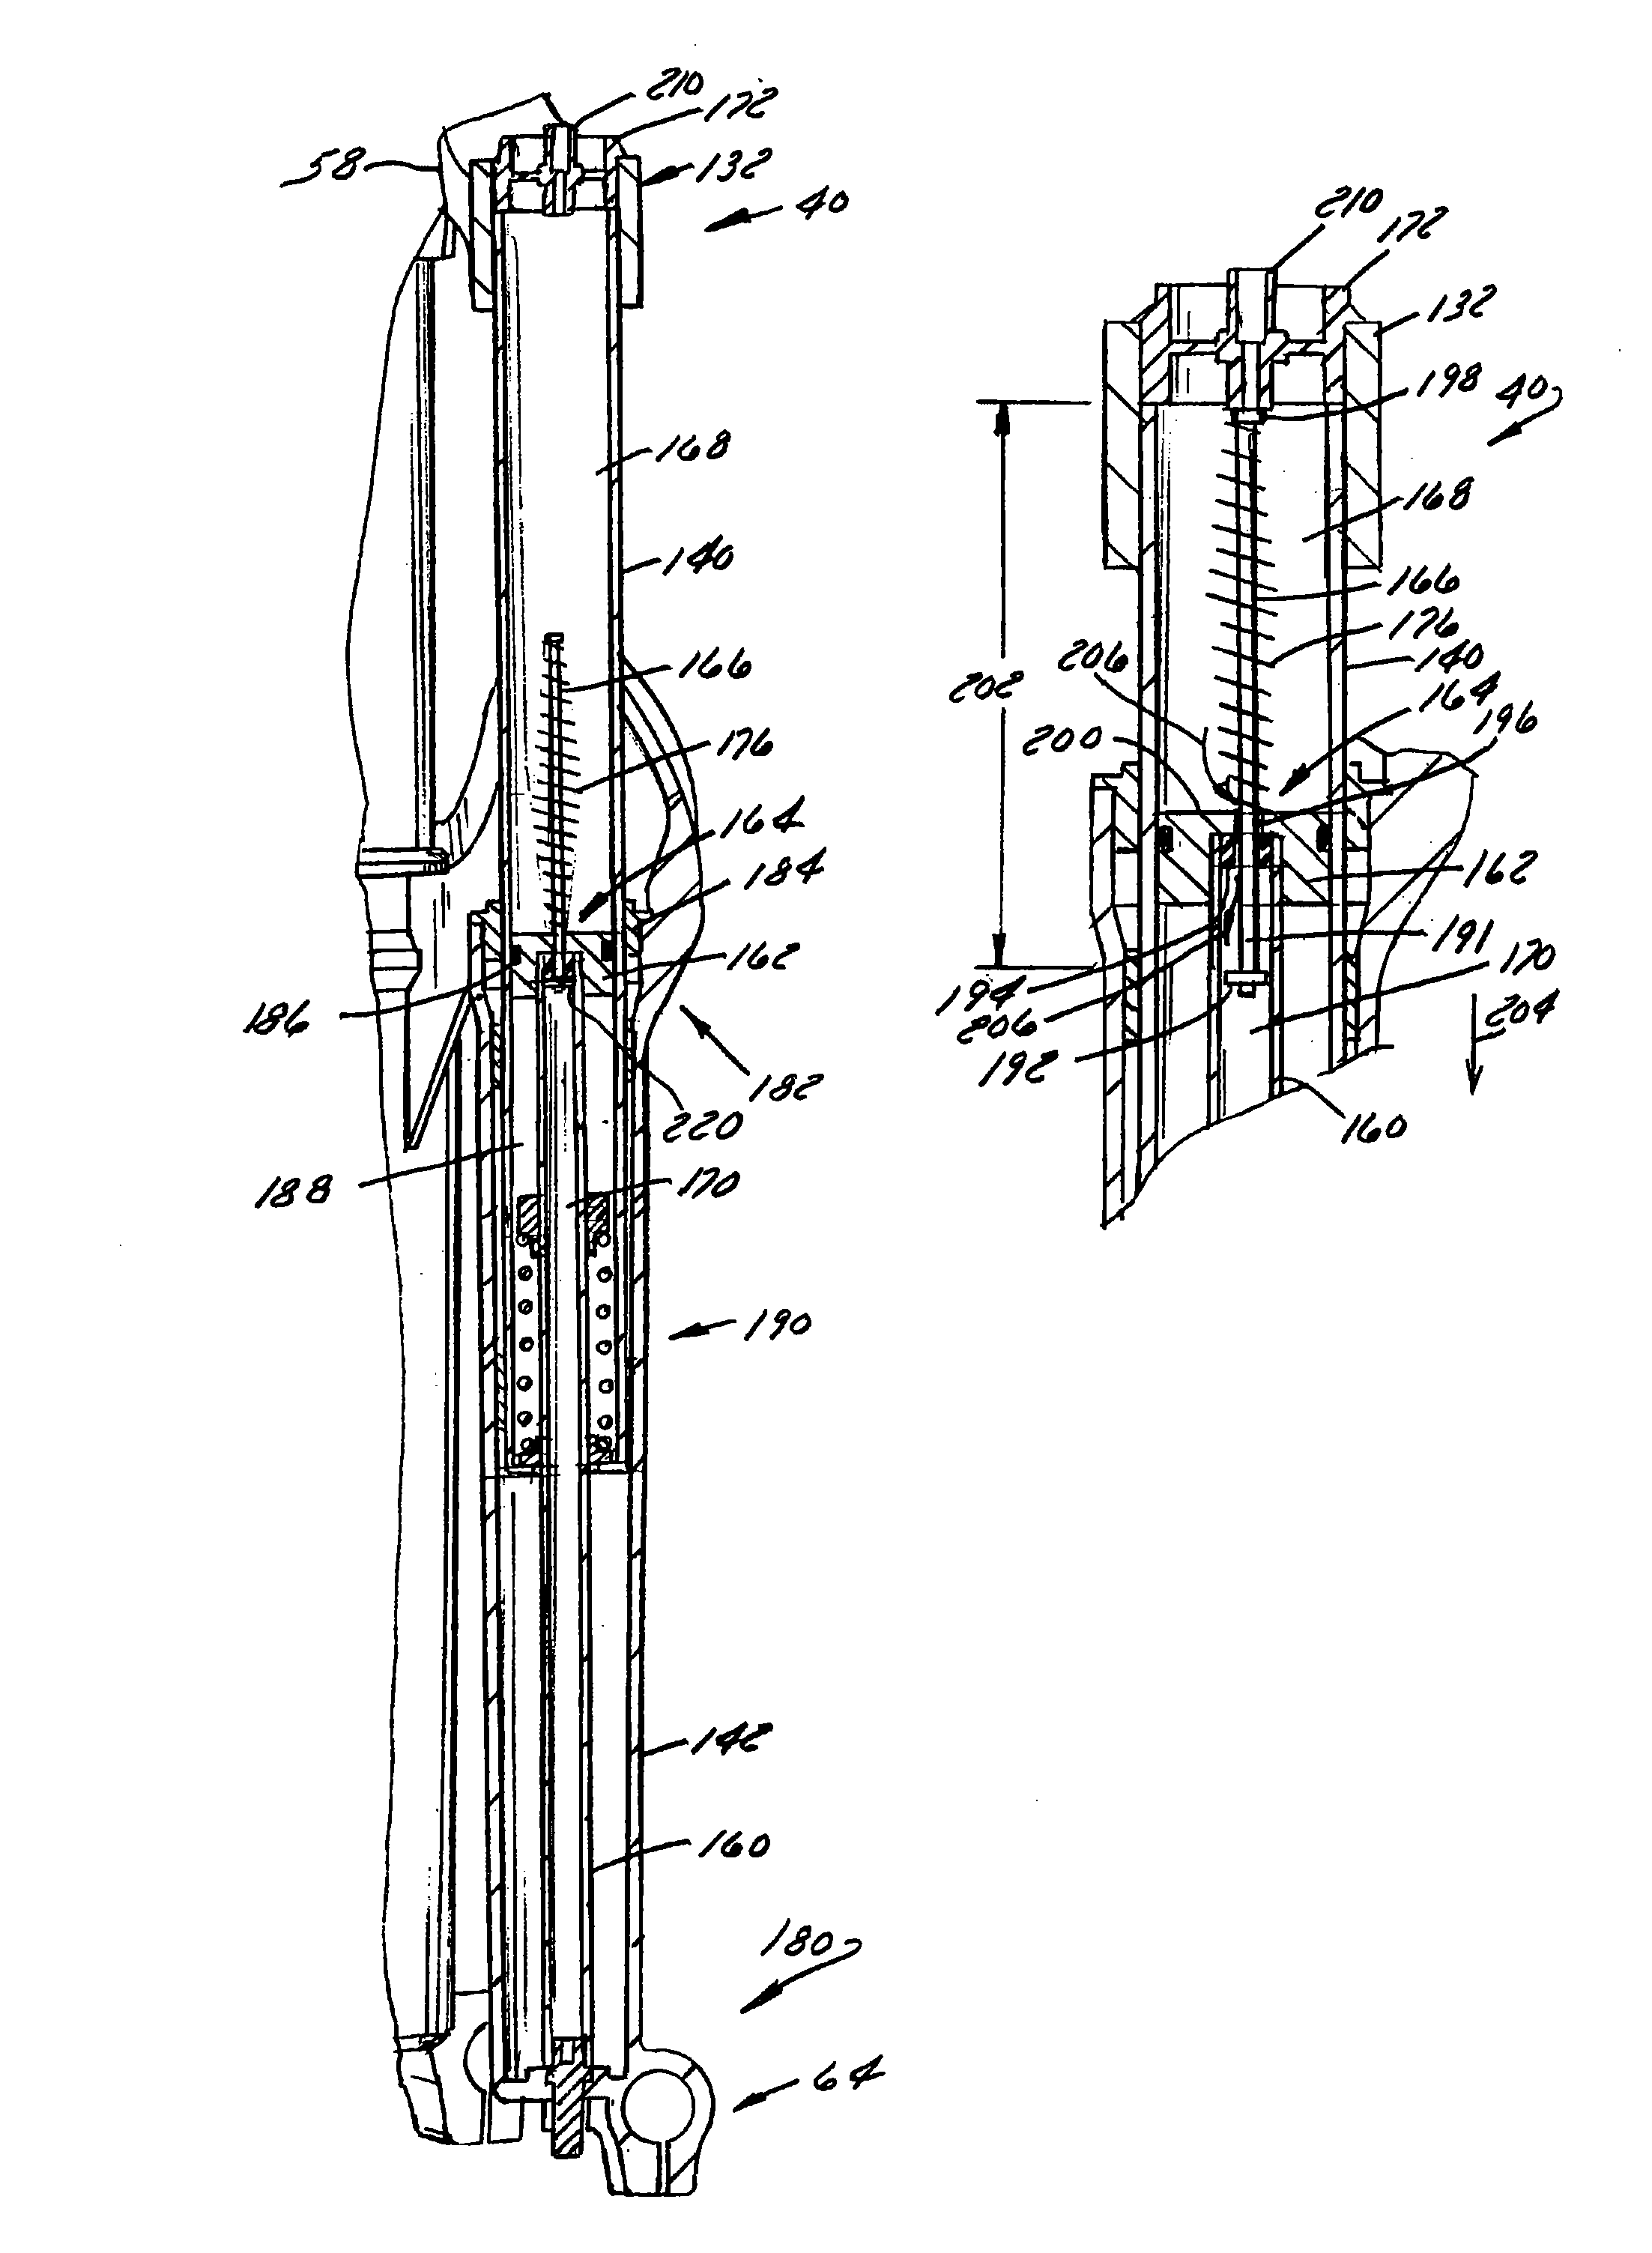 Bicycle shock assemblies with plunger operated valve arrangement